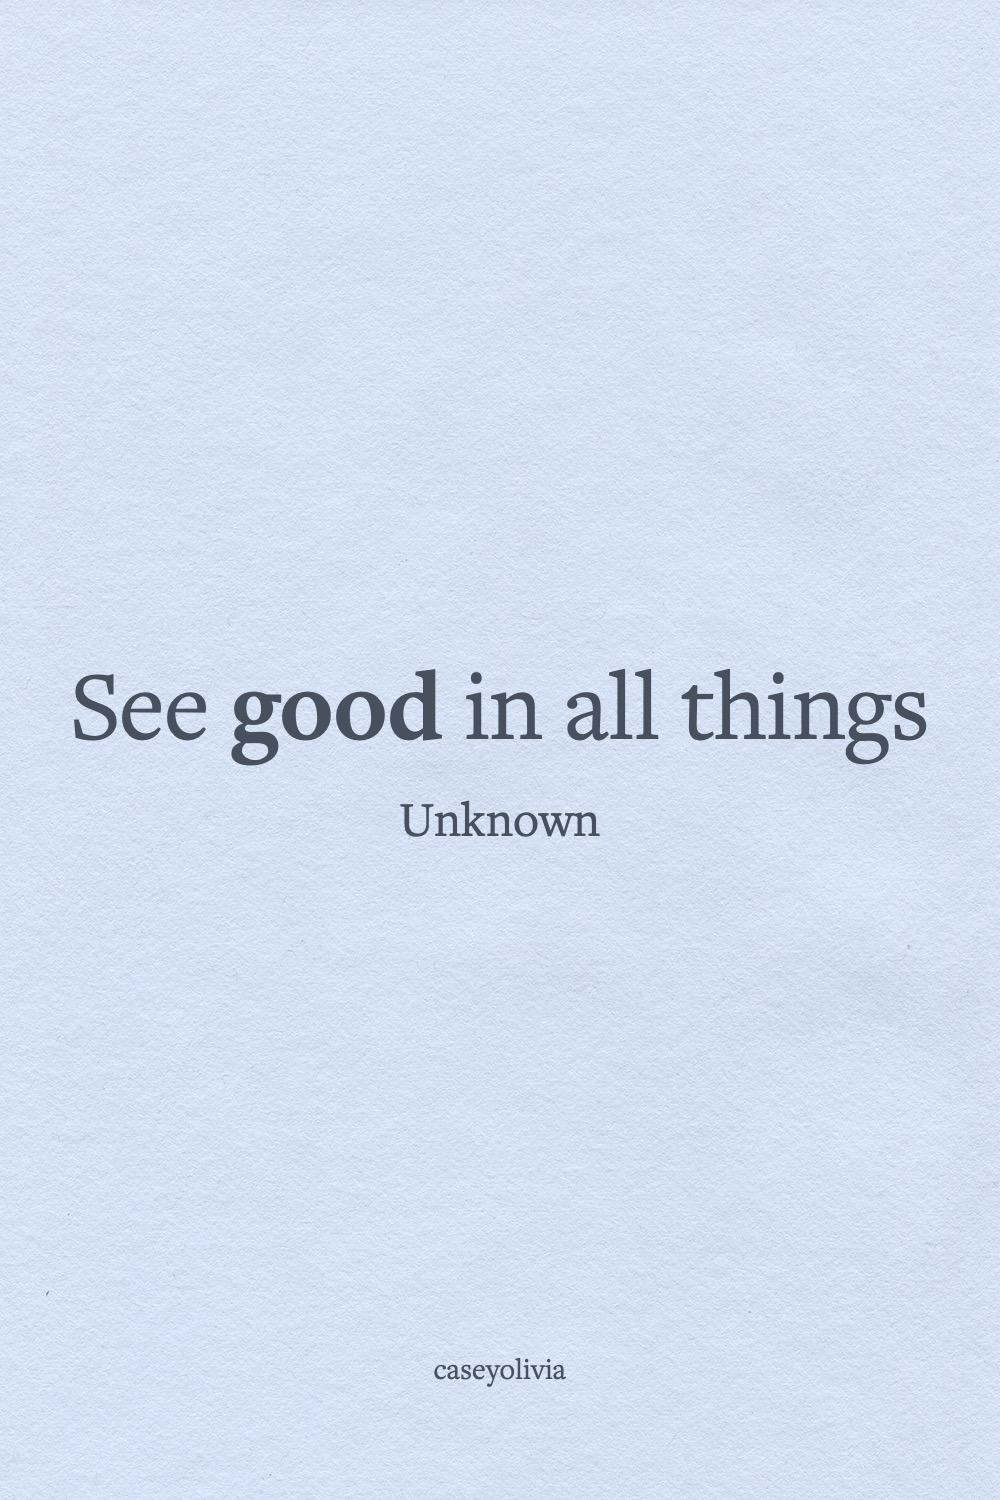 see good in all things short quote about being optimistic